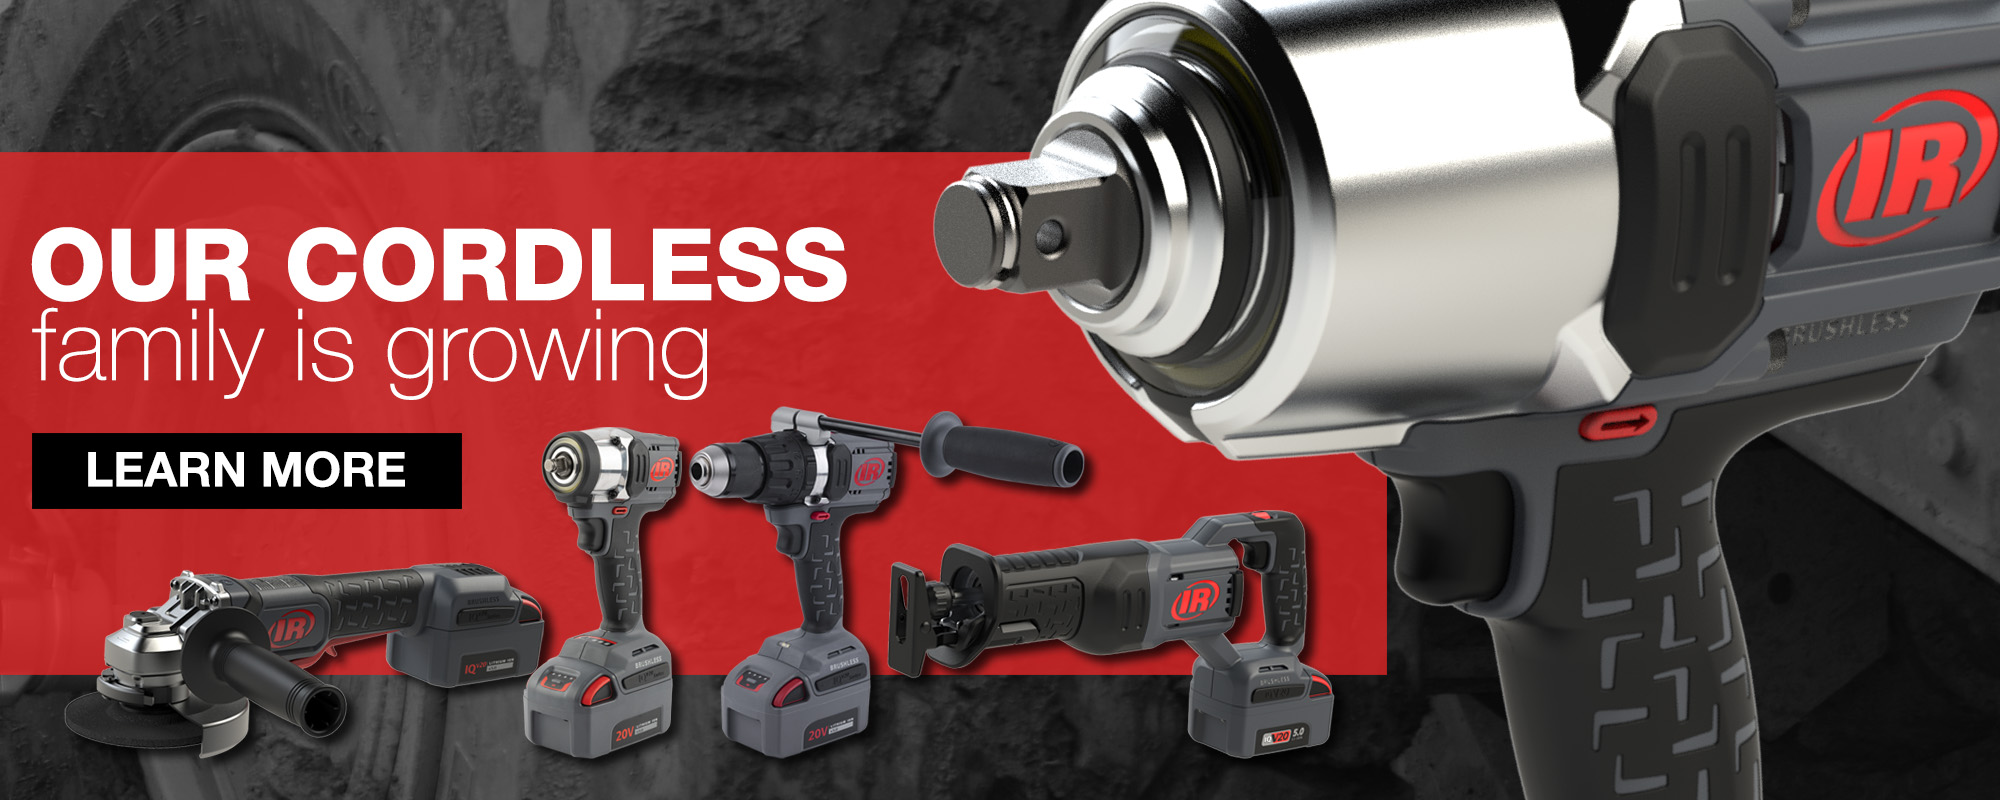 Our cordless power tools lineup is growing